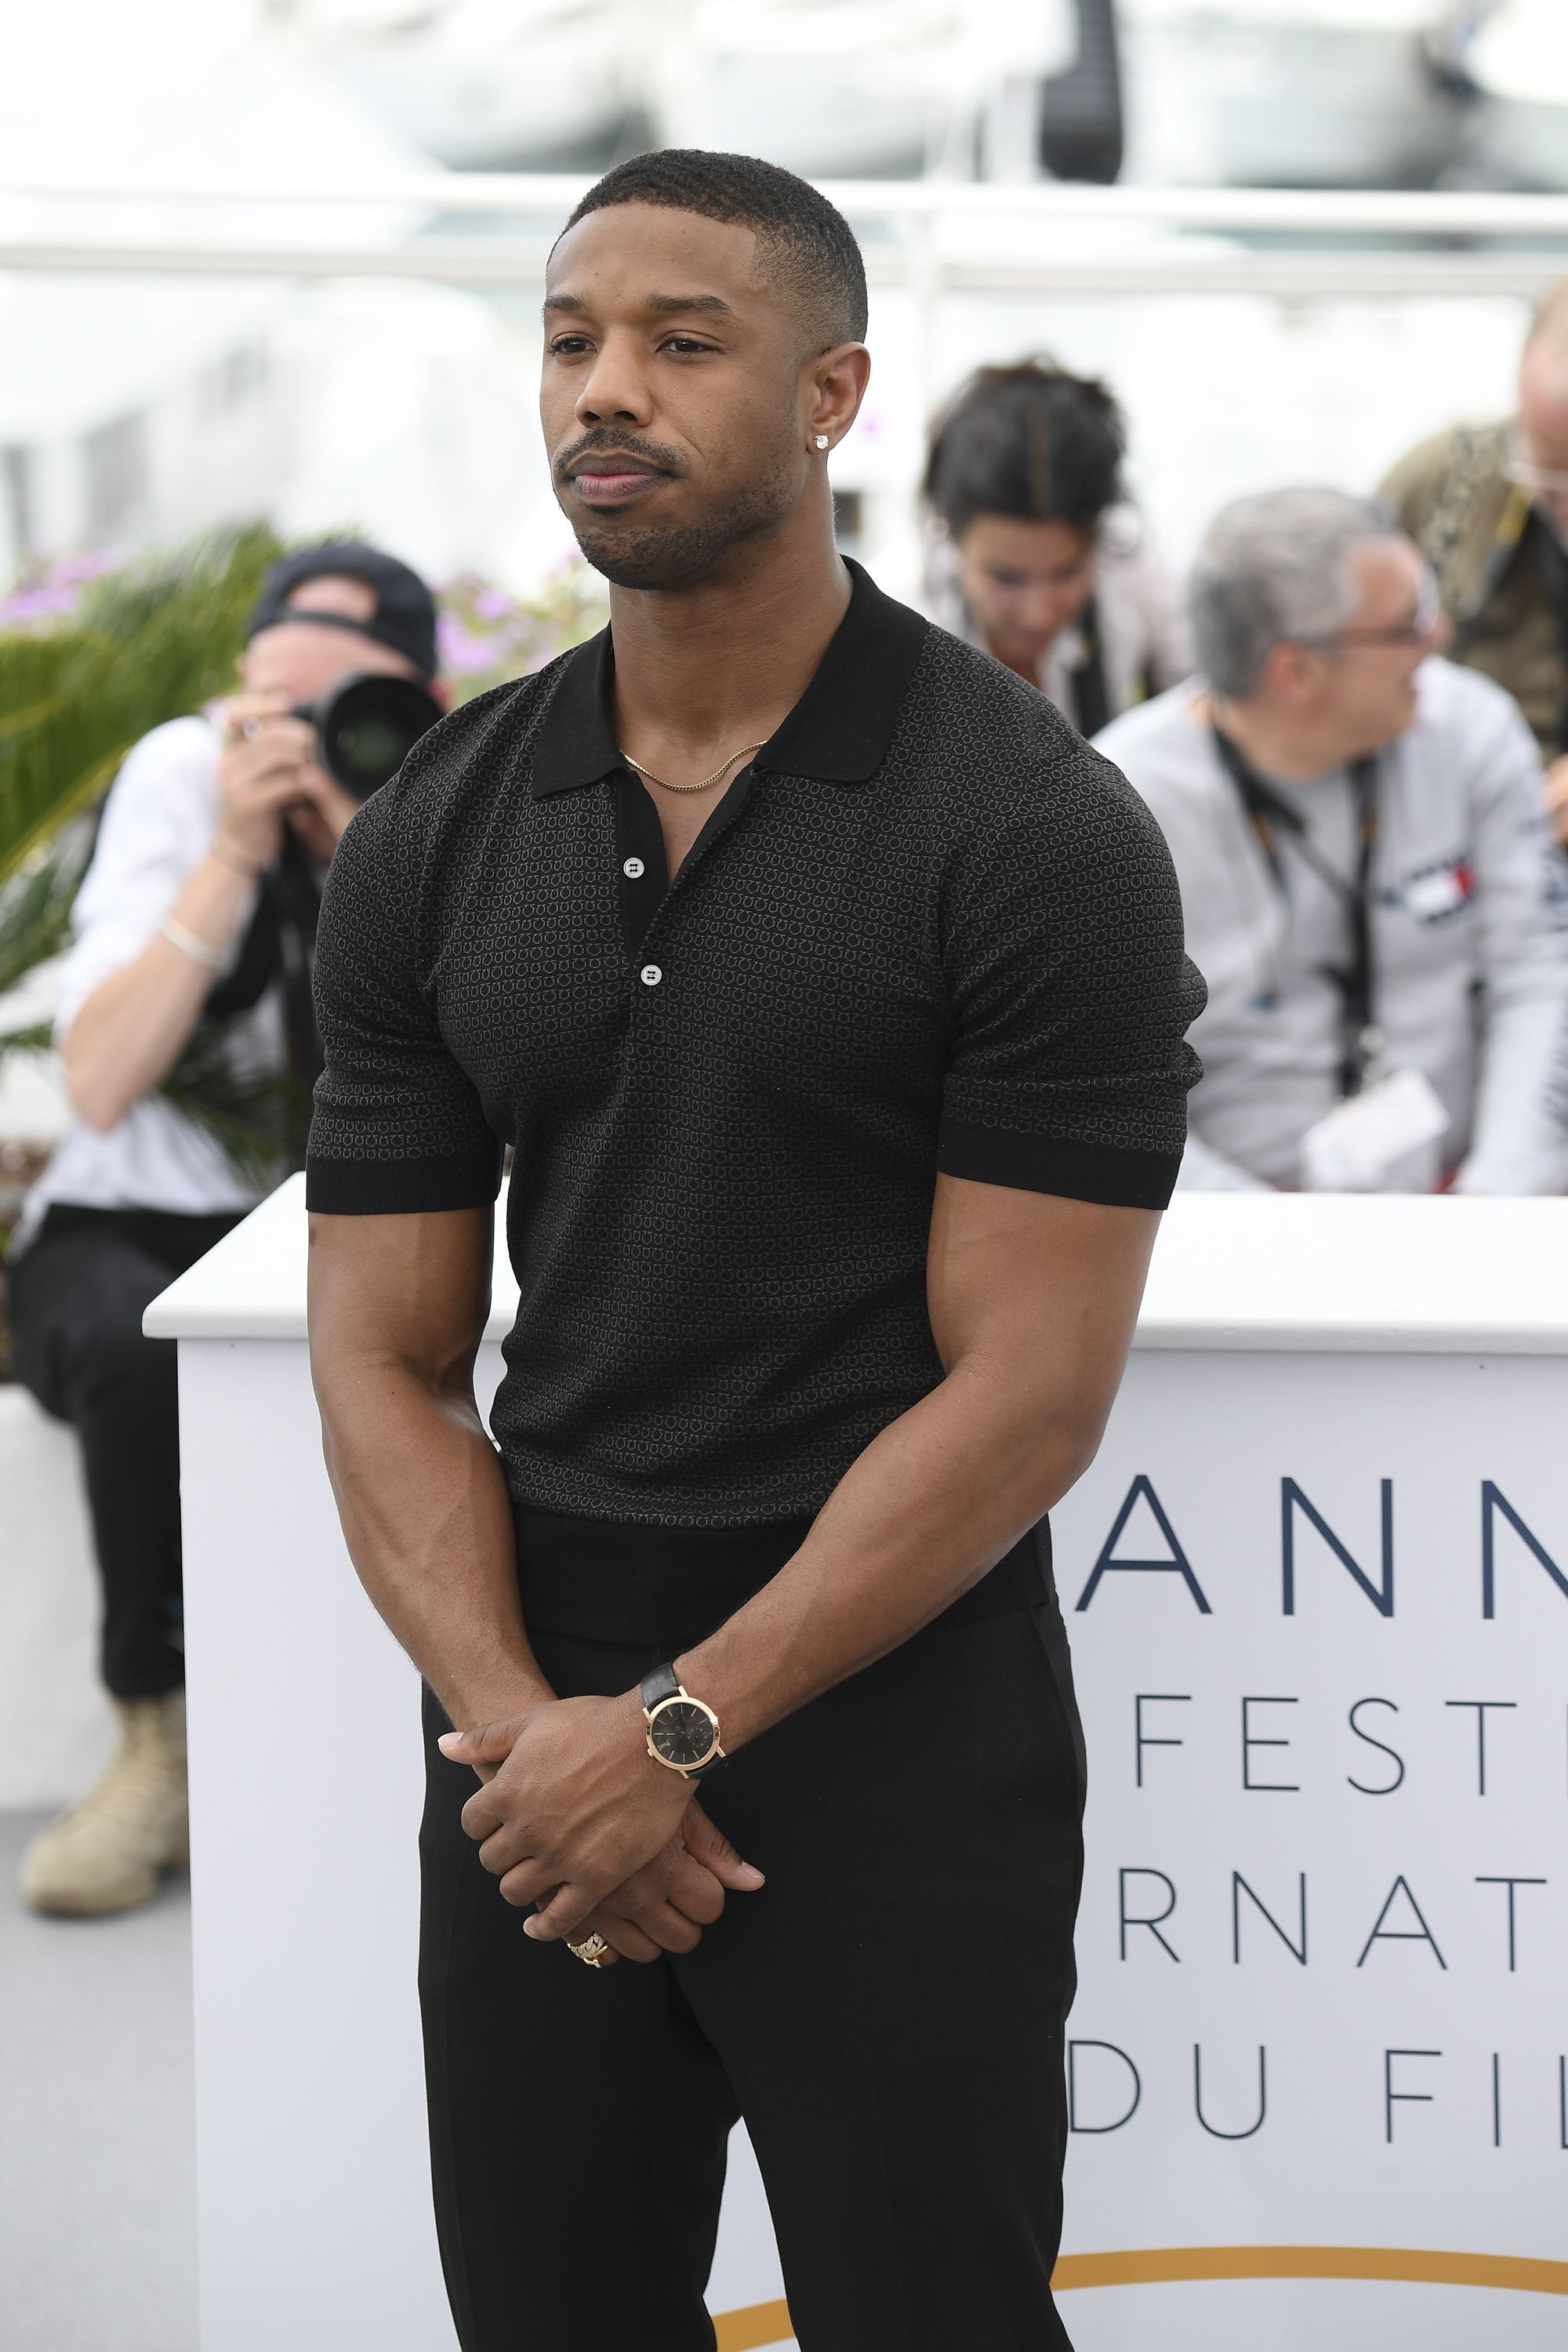 Michael B. Jordan's Style Move Will Make You Look More Stacked